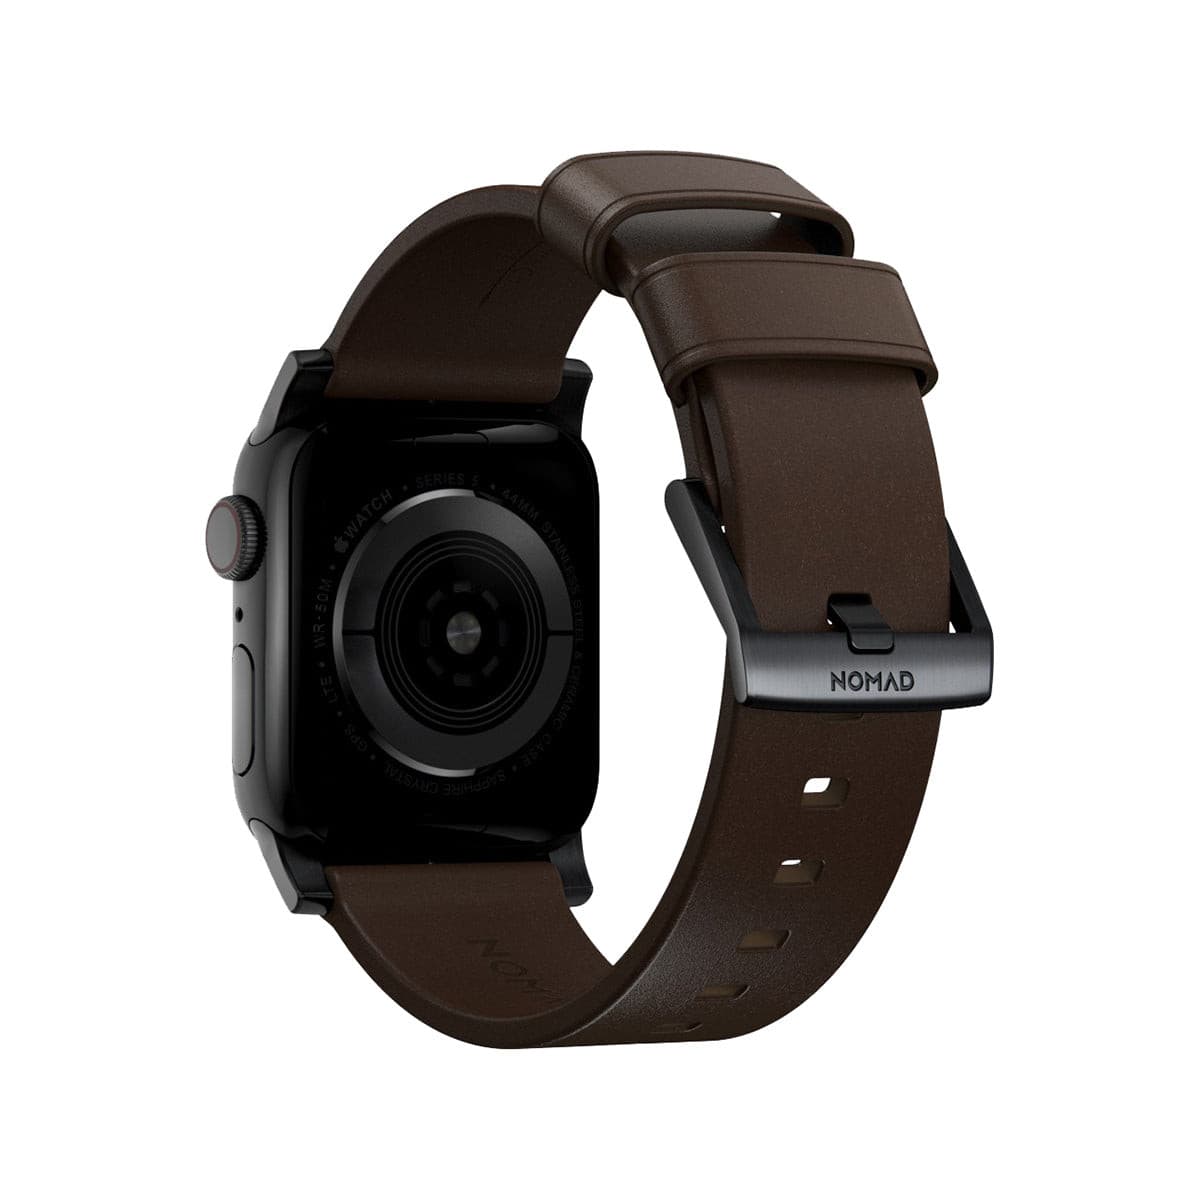 NOMAD Apple Watch Modern Band 45mm - Black Hardware with Brown Nomal Leather Strap.